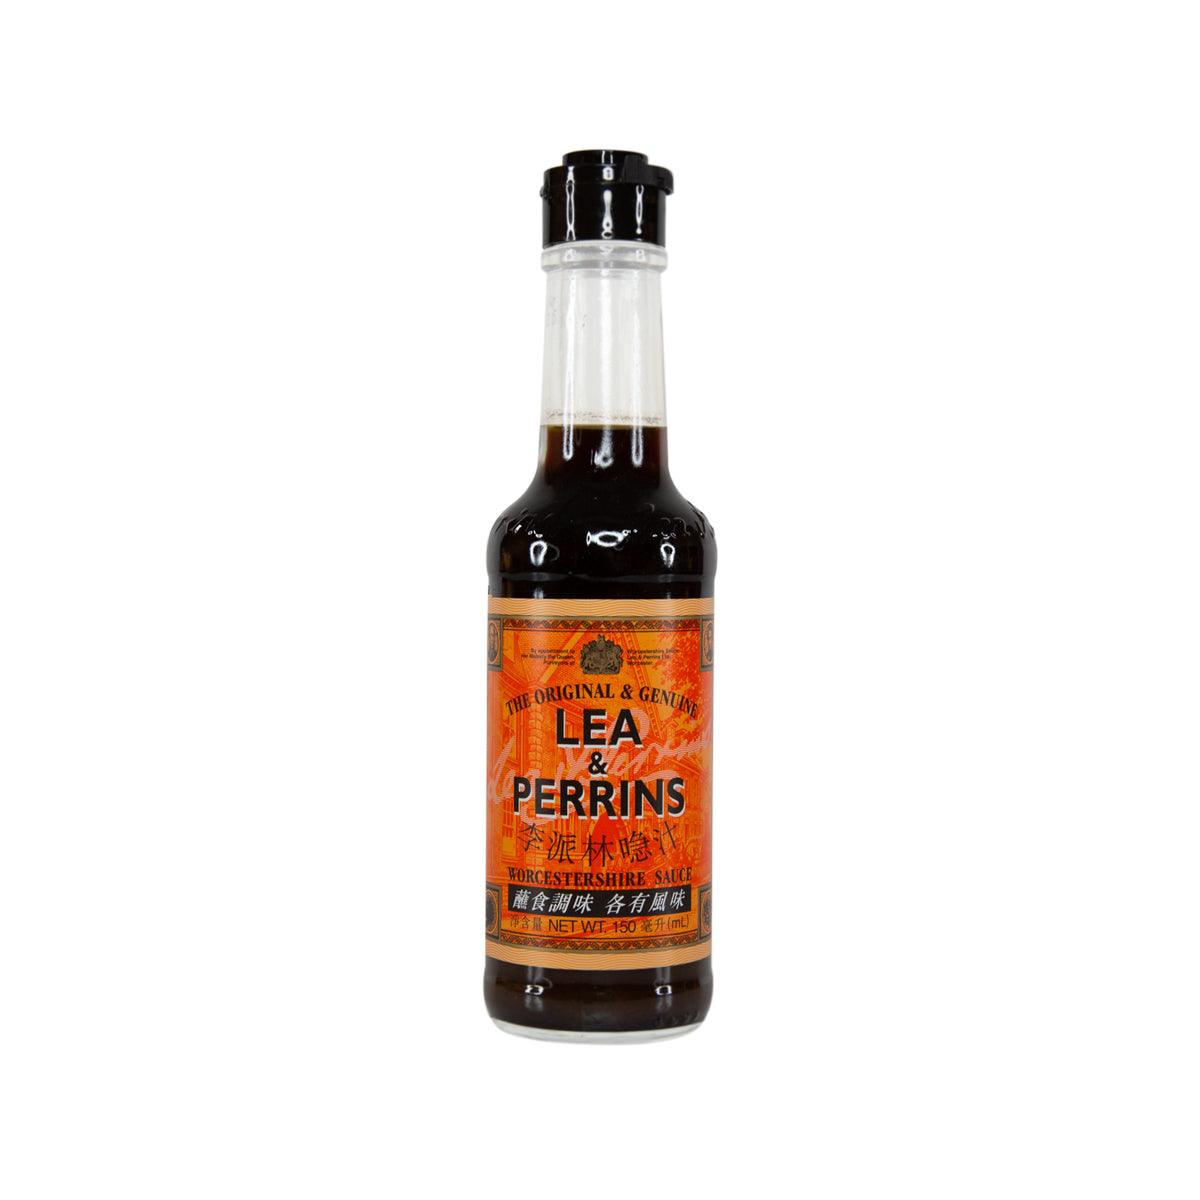 Crystal Worcestershire Sauce